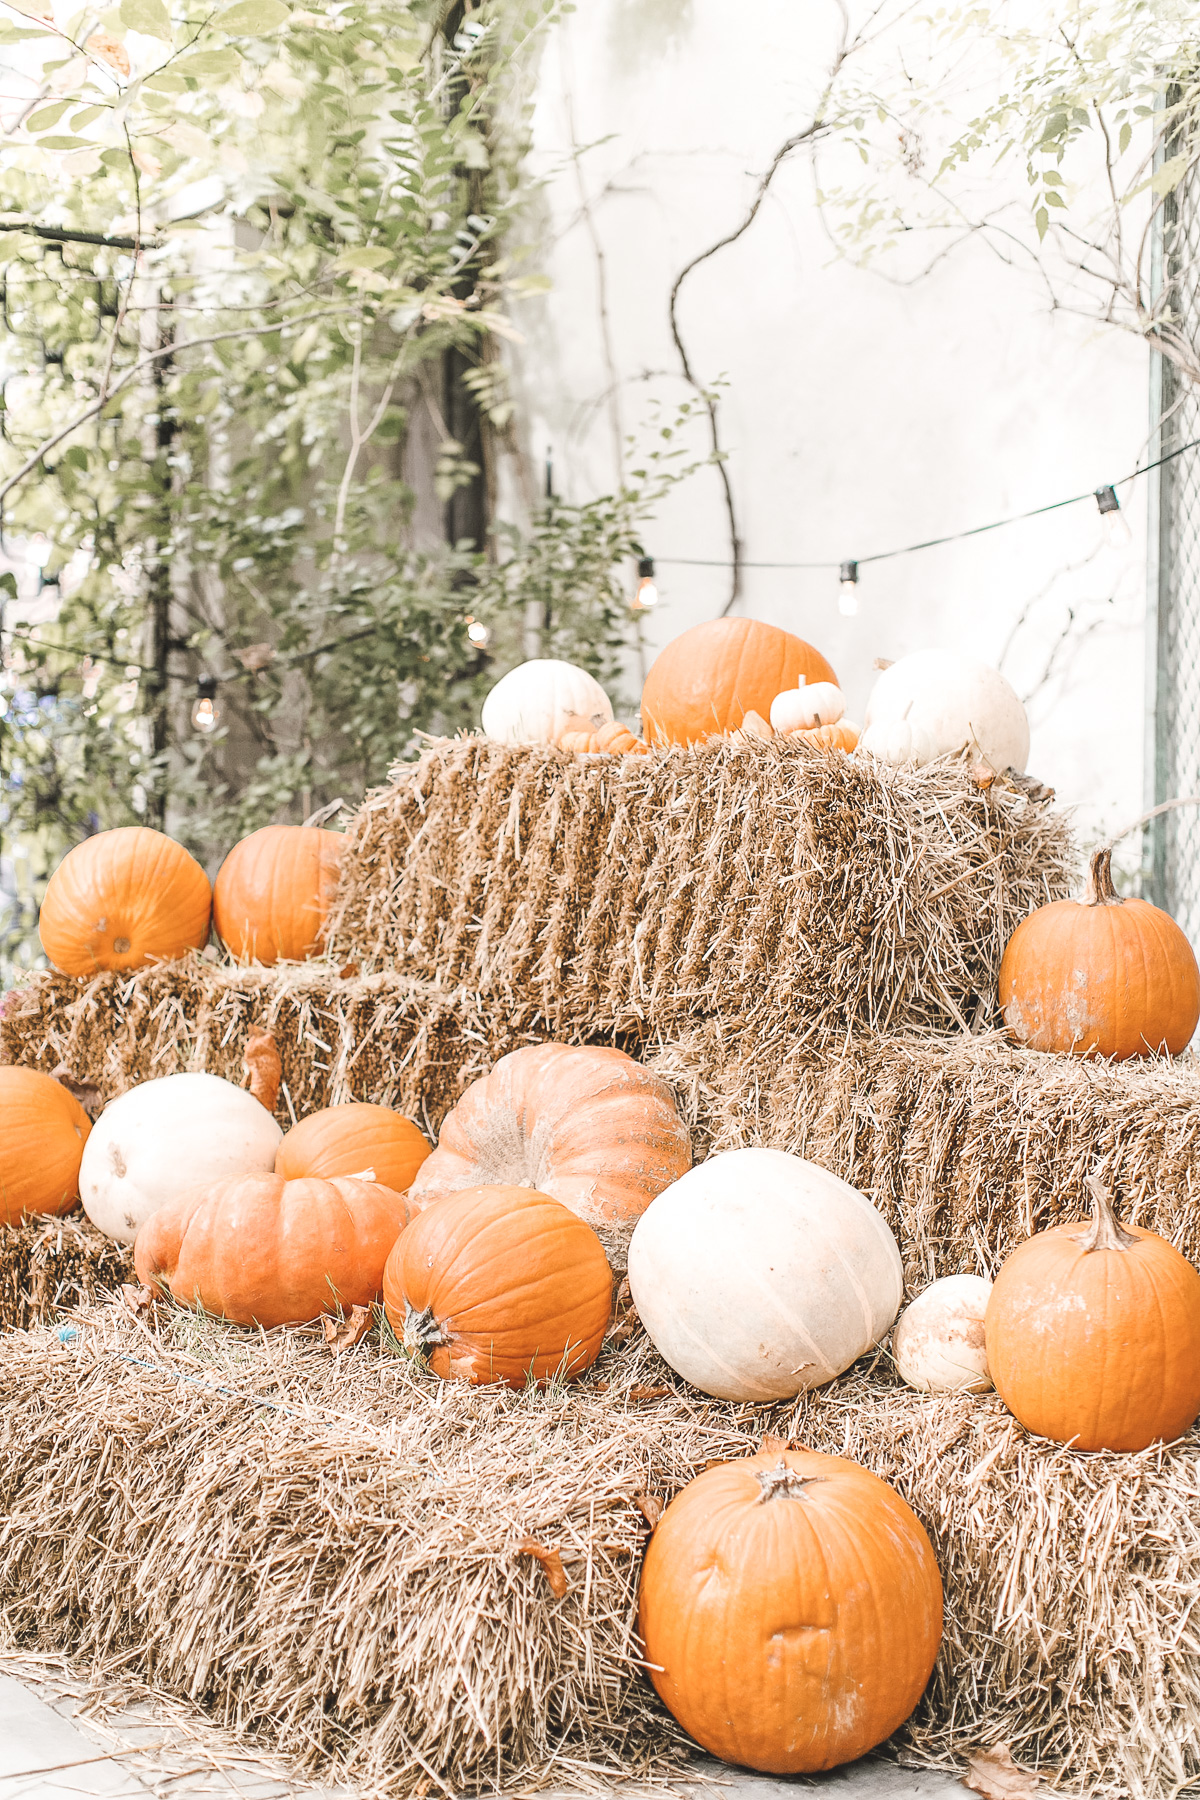 12 Family Friendly Fall Activities You Should Put on Your Calendar Now!